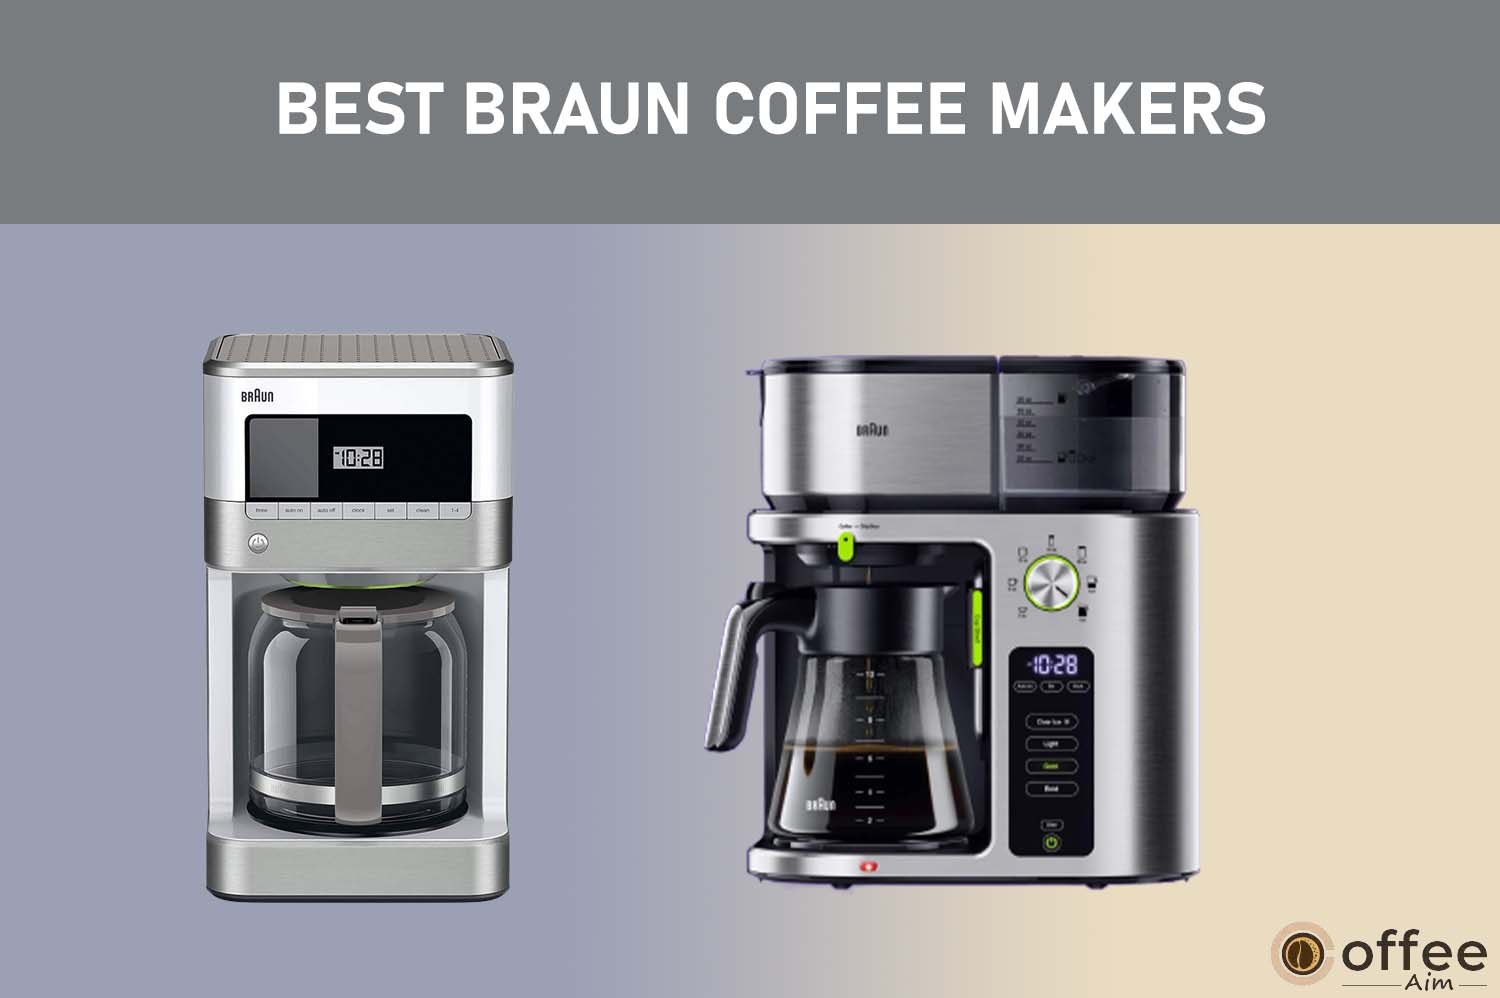 Featured image for the article "Best Braun Coffee Makers"